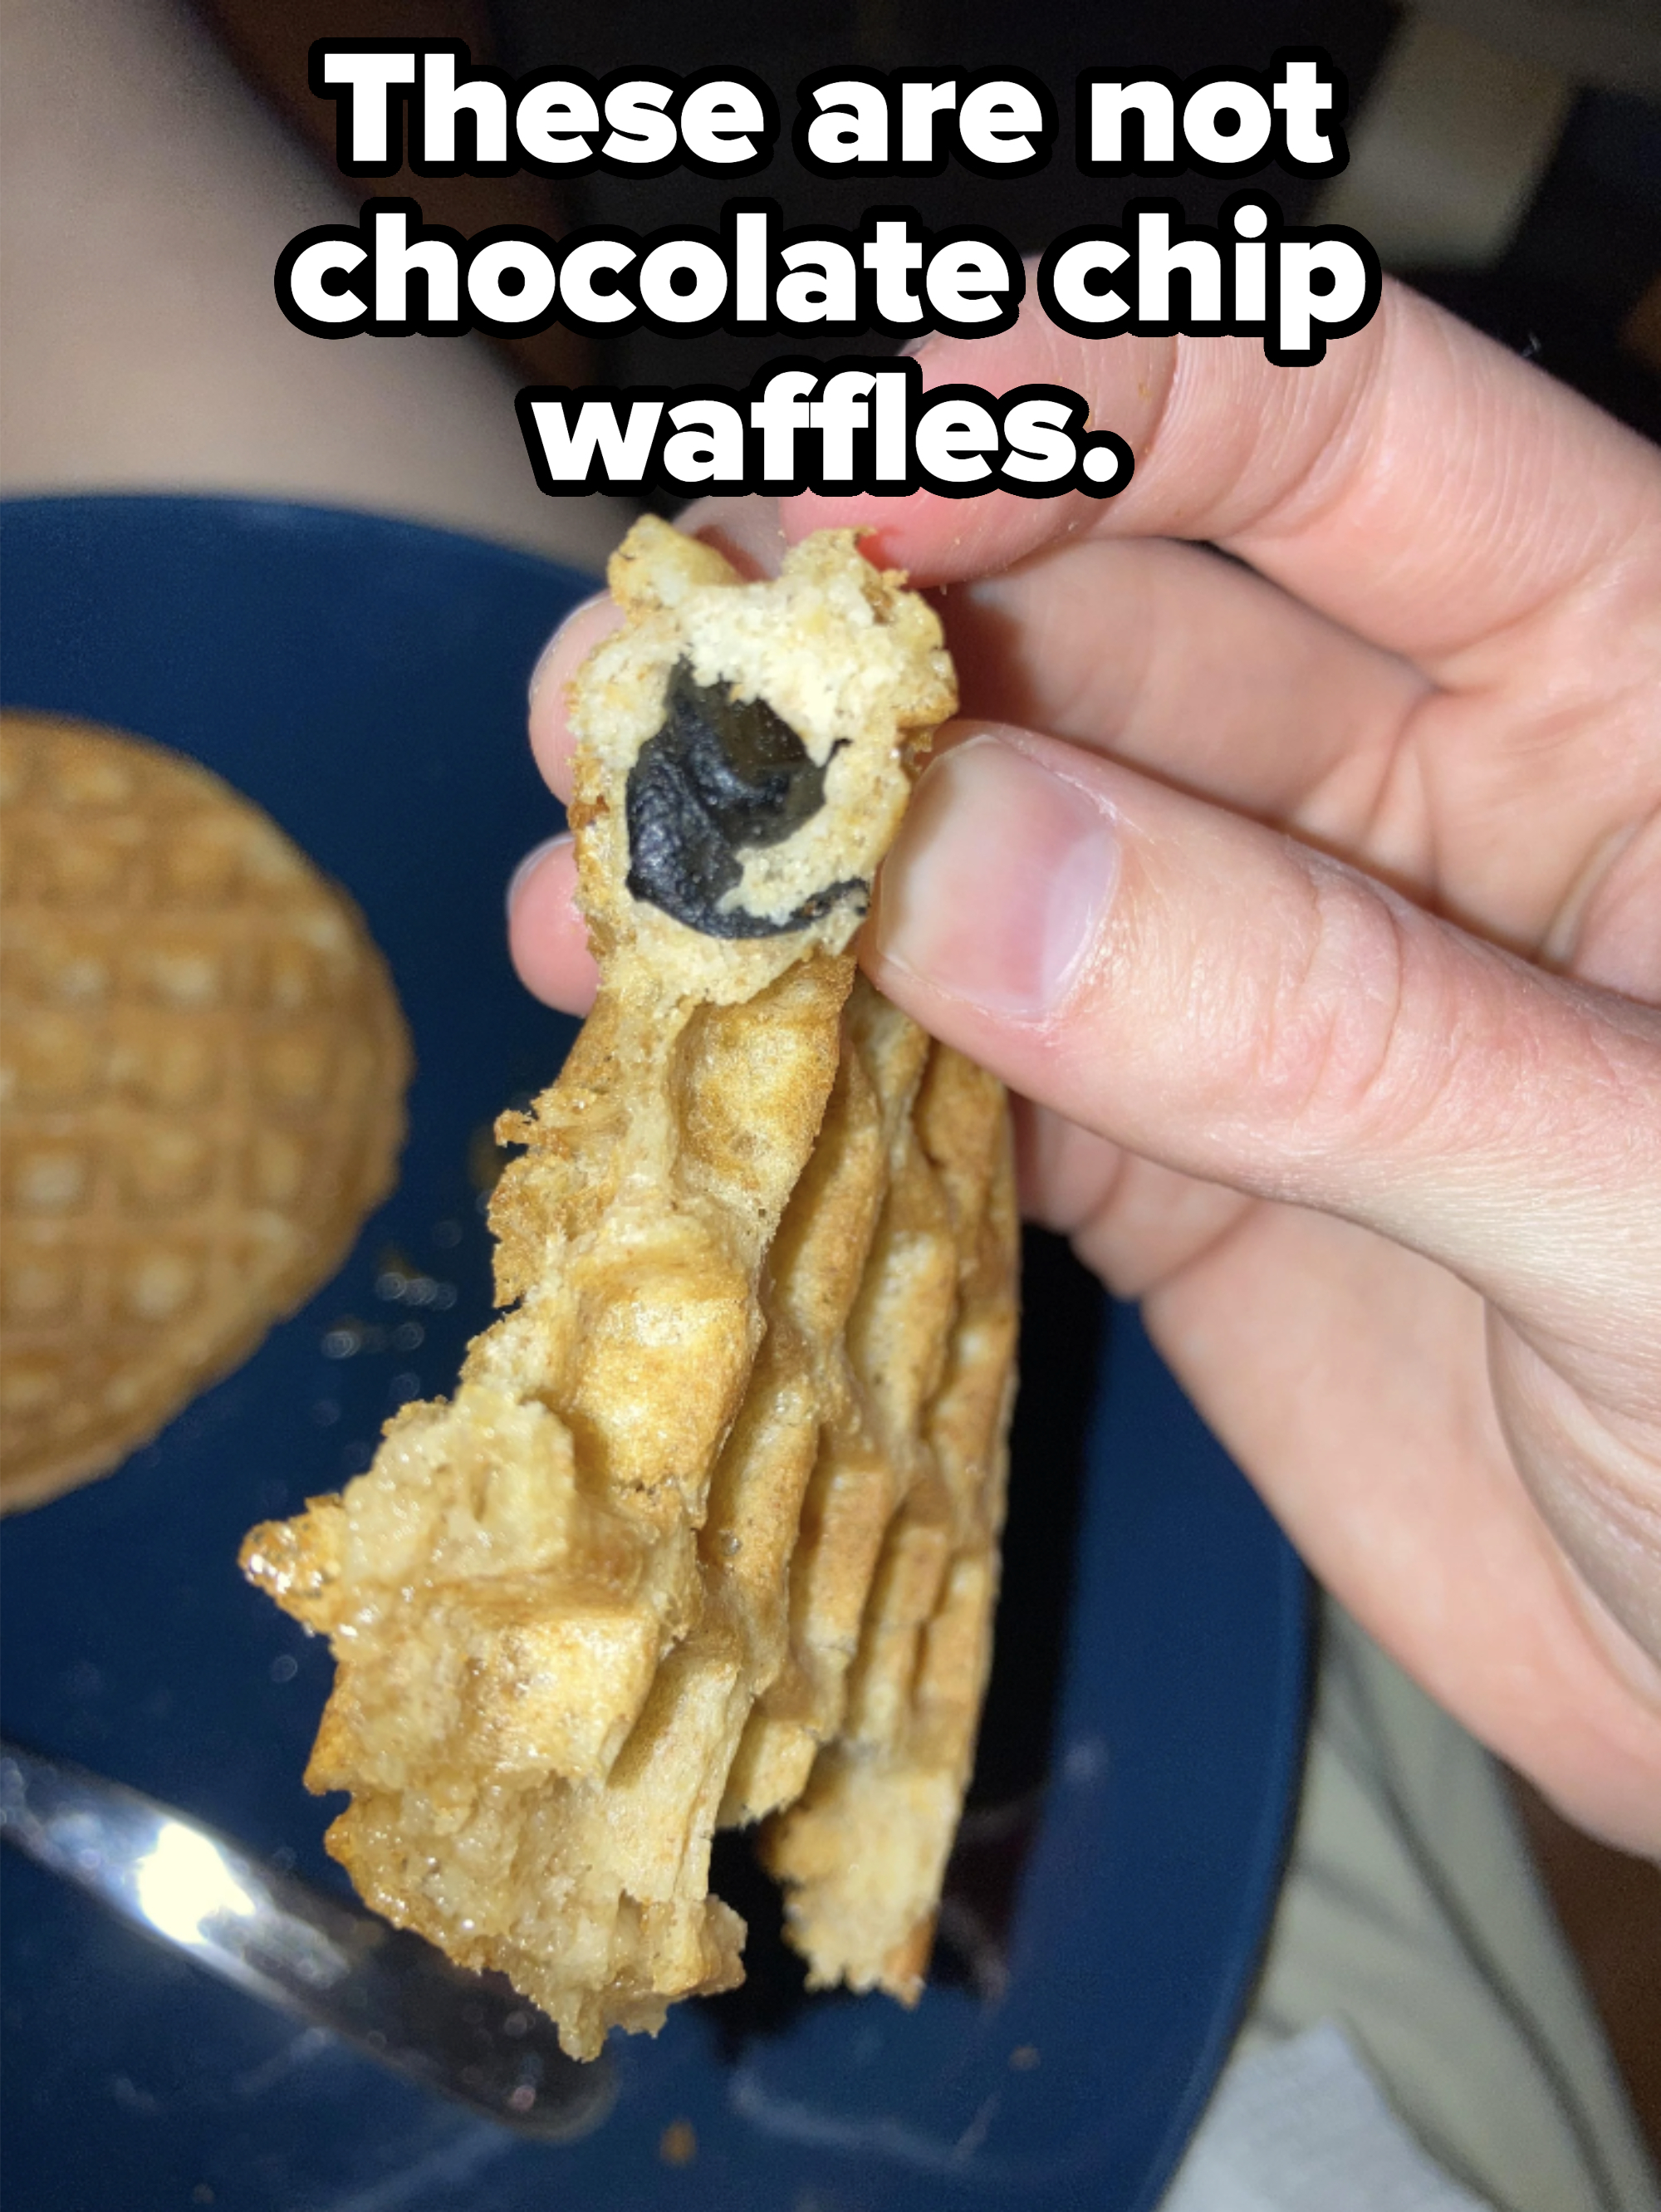 Hand holding a half-eaten waffle with a single visible chocolate chip